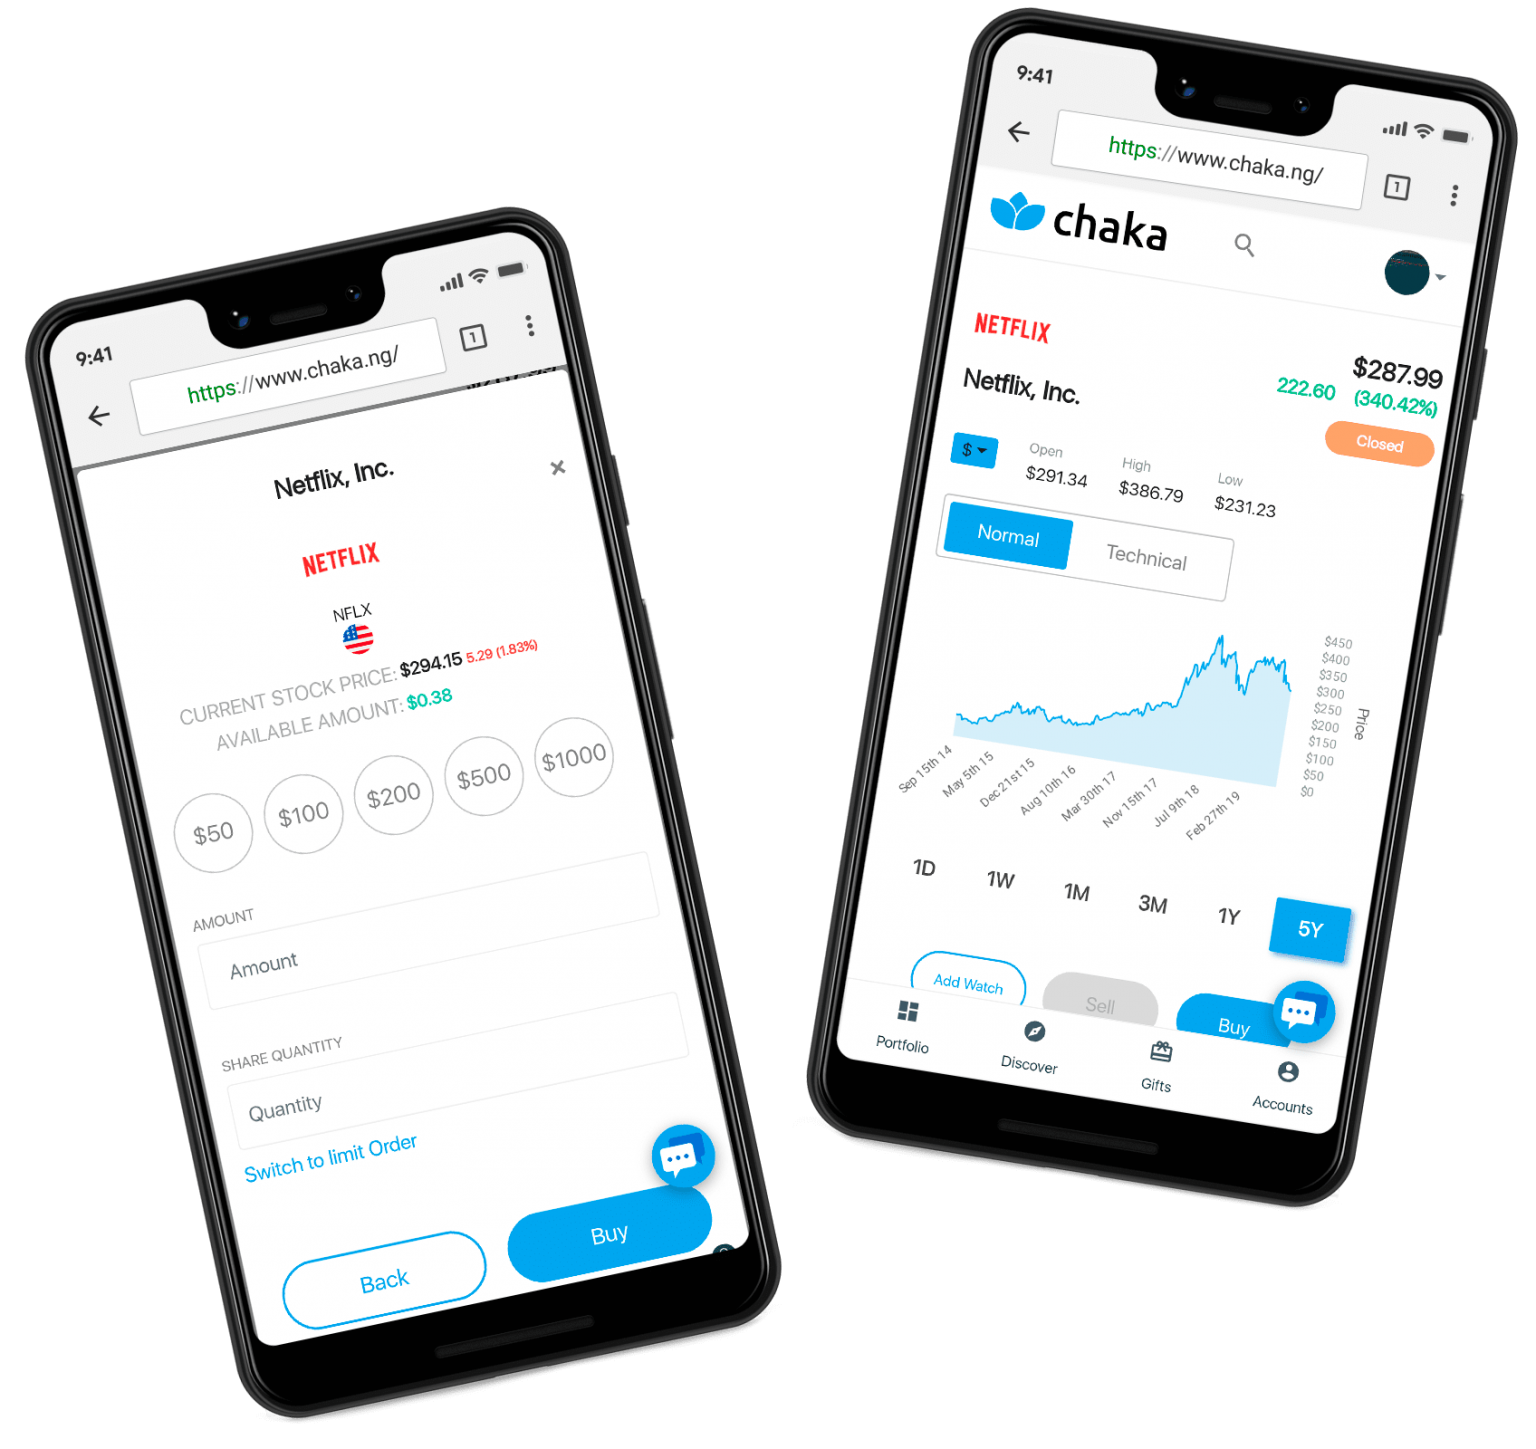 Chaka Investment App Review 2020: Fees, Features & Safety ...